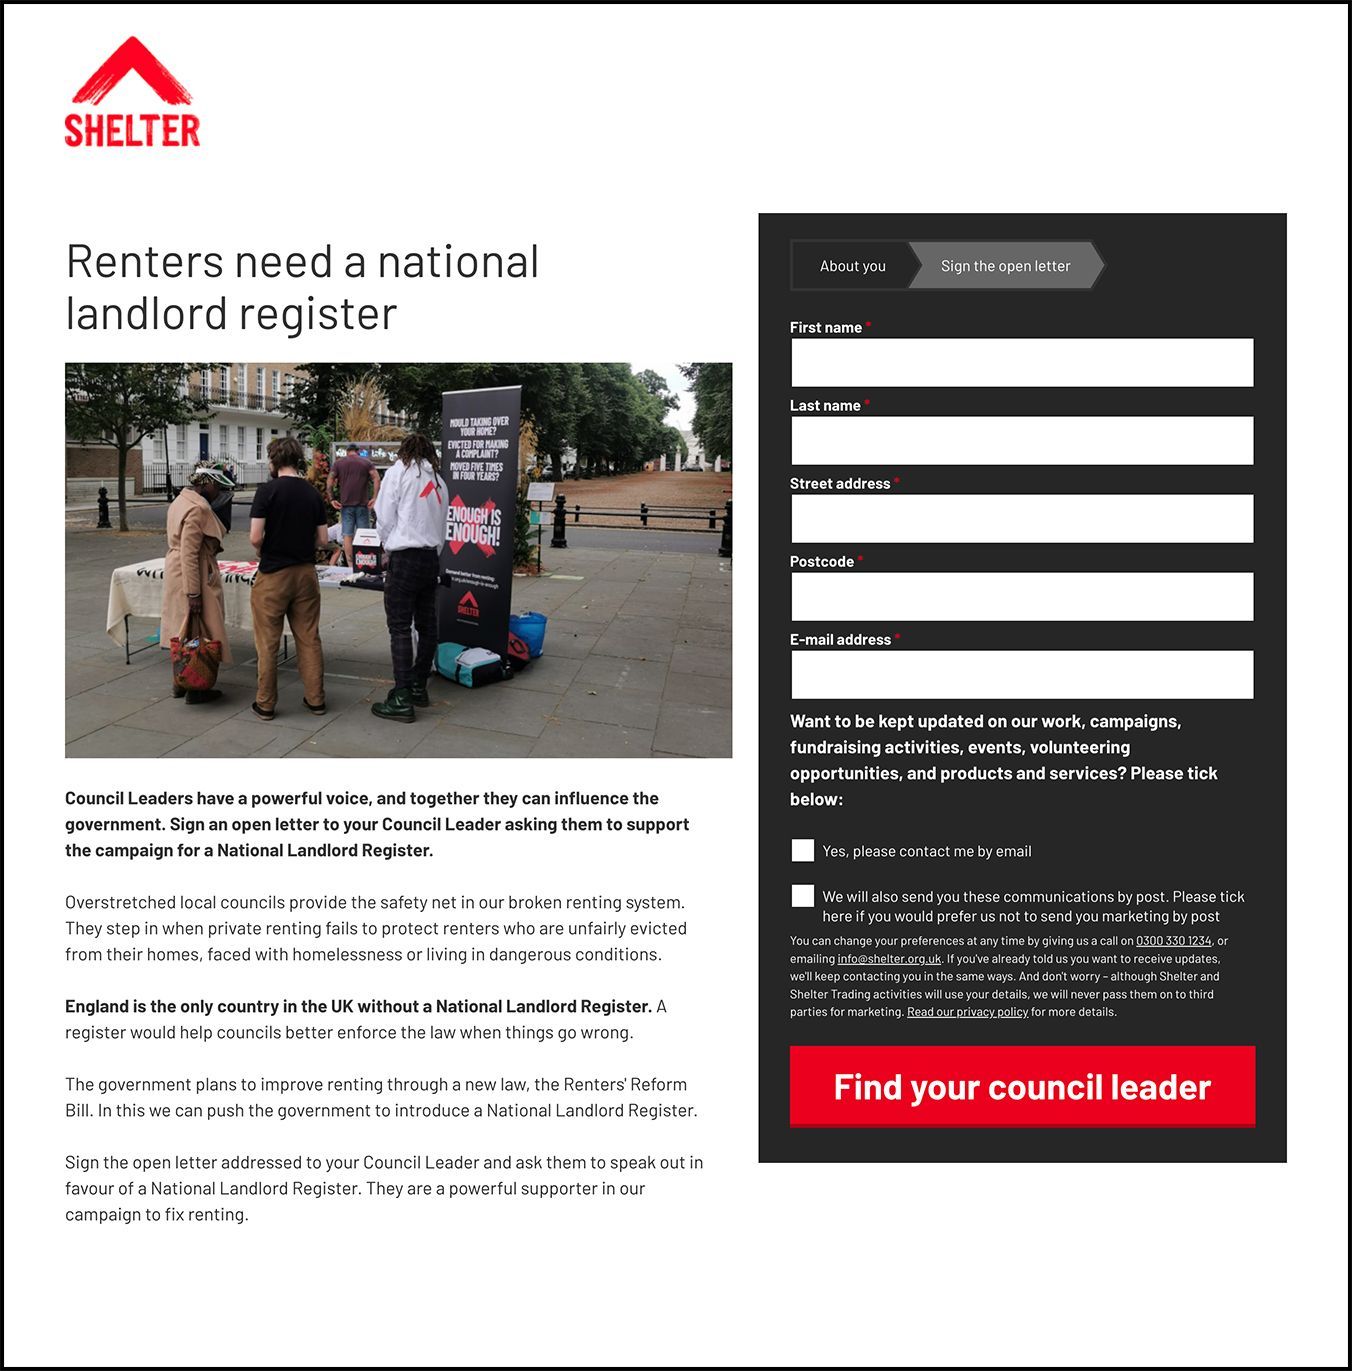 Online action page - Shelter 'Renters need a national landlord register' Photo of a campaign street stall, and a form asking people to email their council leader. 